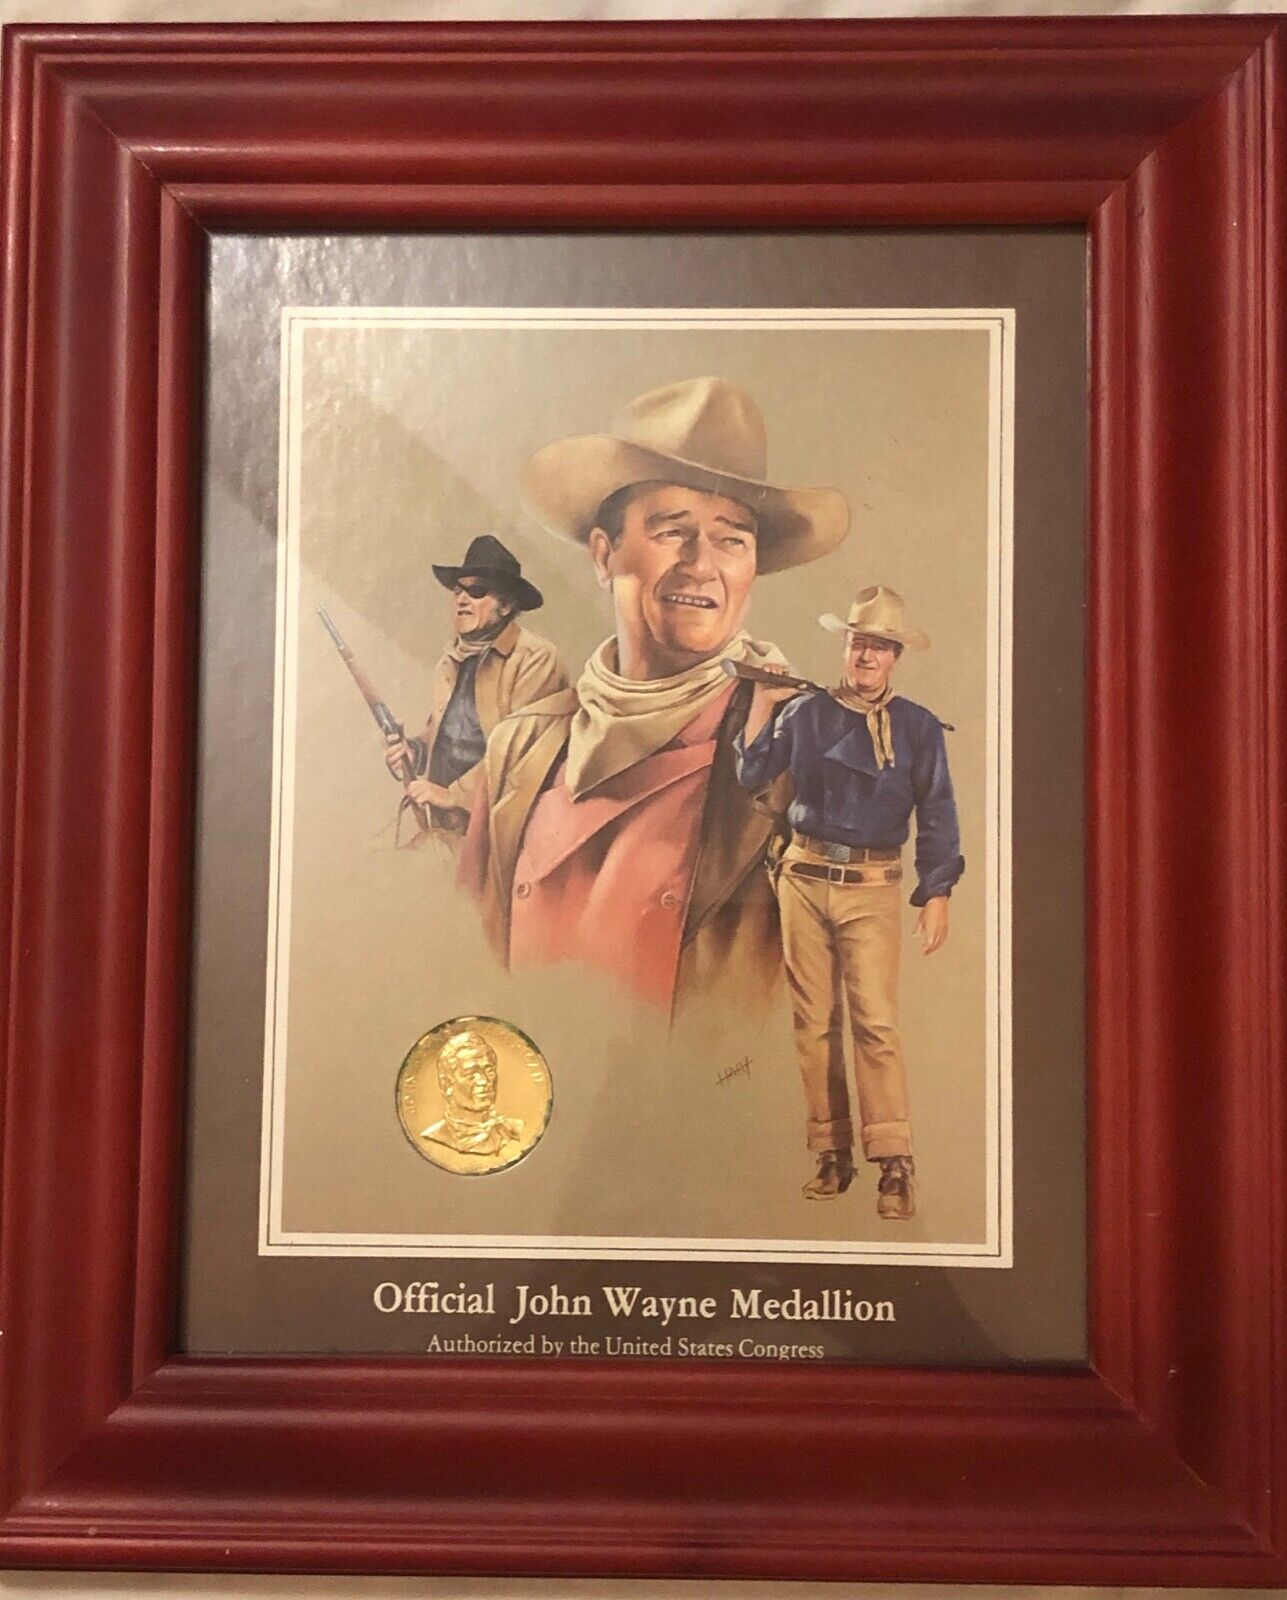 Vintage John Wayne Official Medallion Coin Framed Art Authorized by Congress 